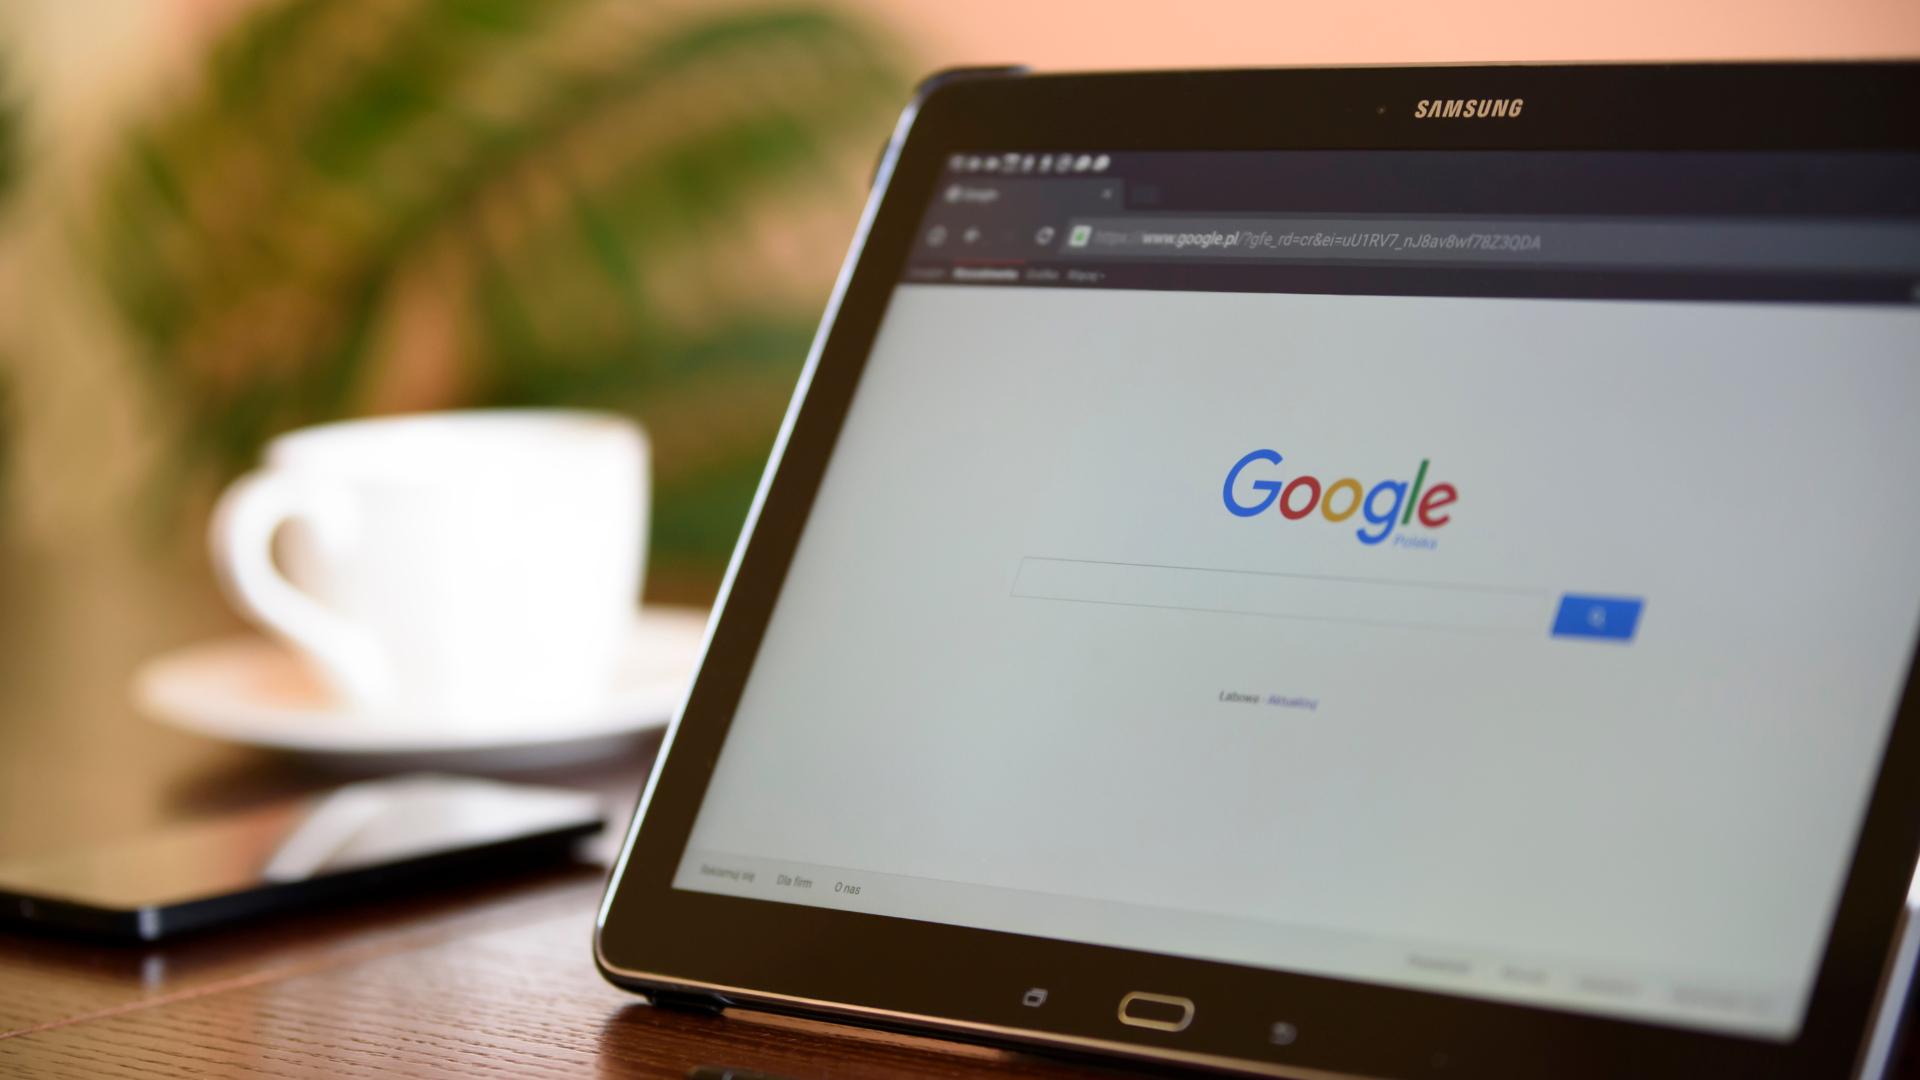 google homepage opened in a samsung tablet